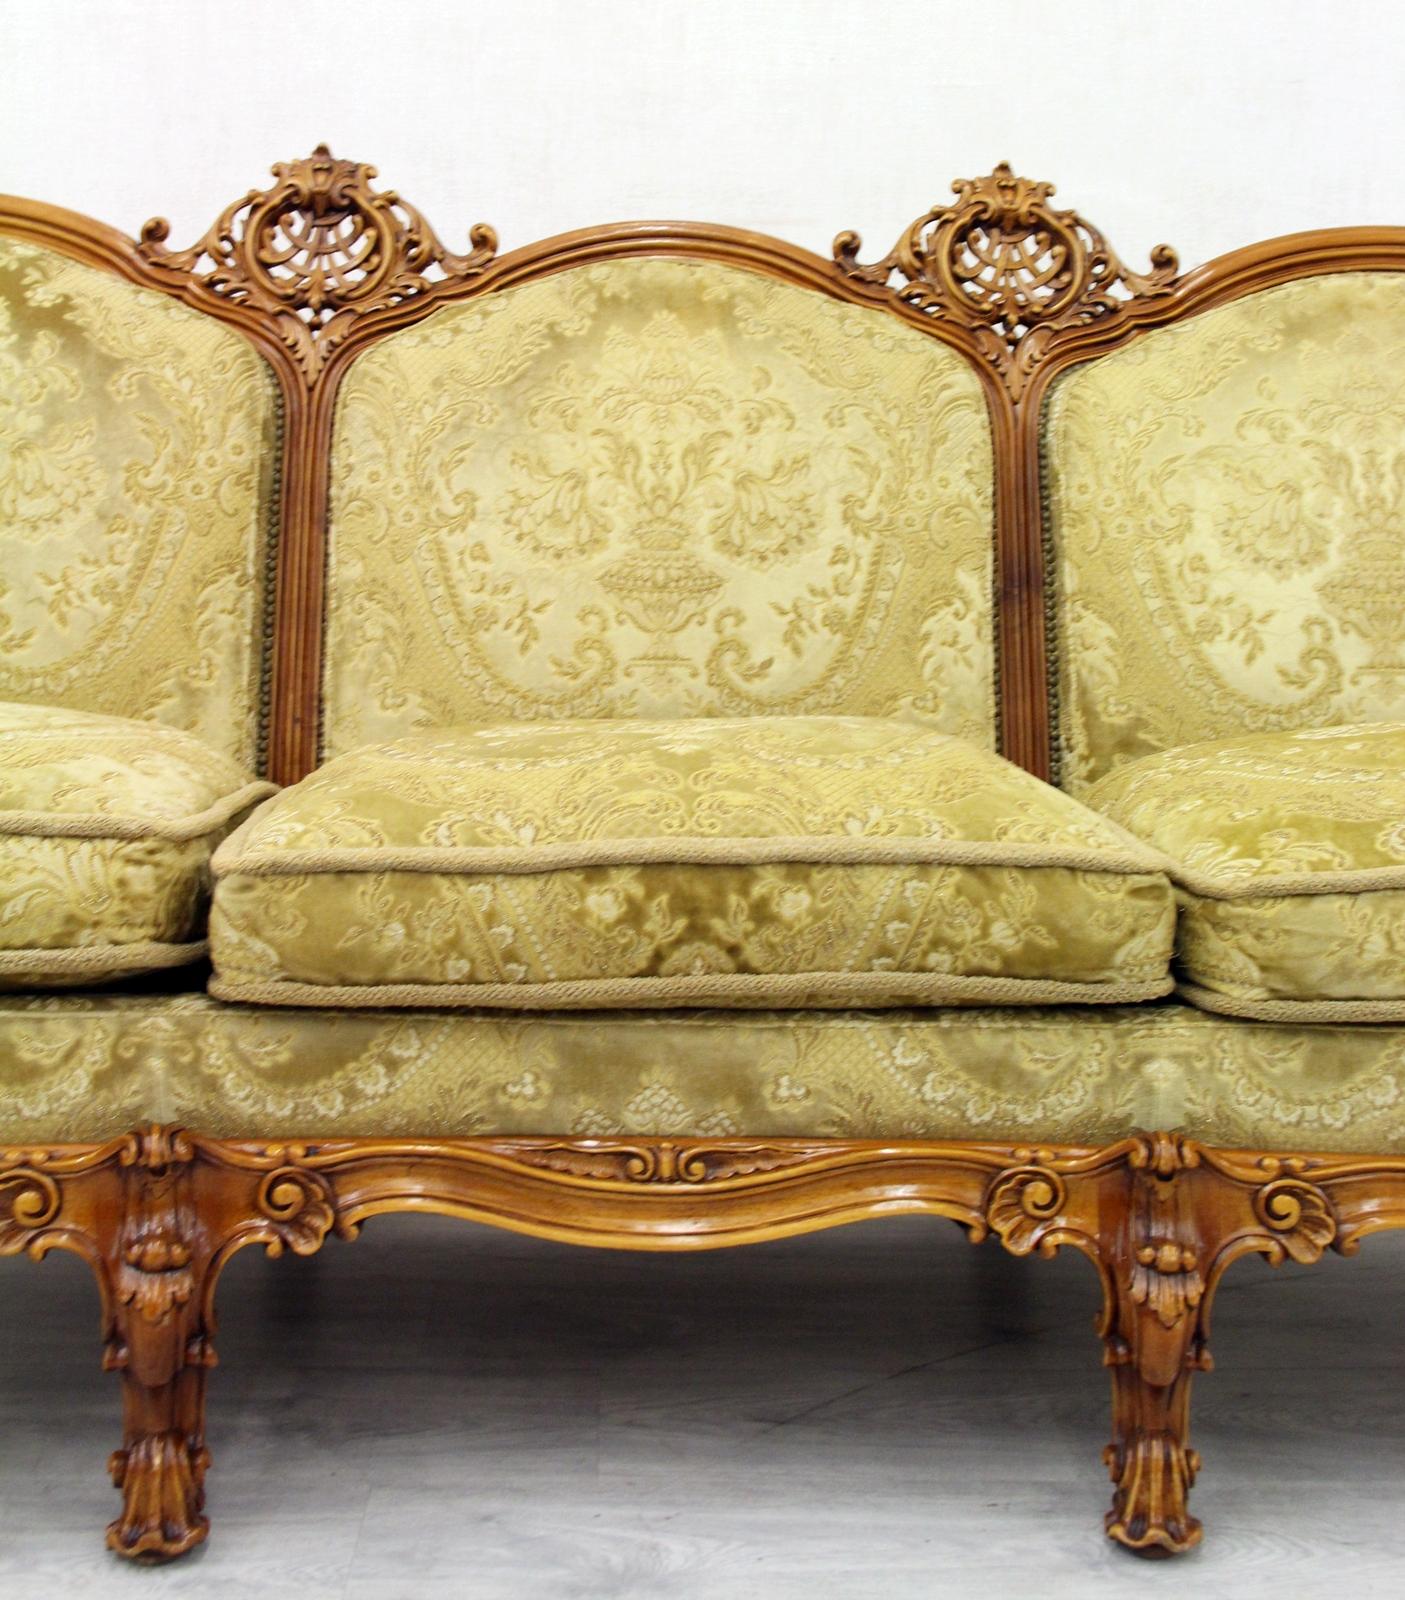 Sofa Baroque
The shape is particularly beautiful, the carvings are very fine and elaborate
Measures: Height x 103cm, length x 220cm, depth x 80cm
Condition: The sofa is in a very good condition for the age and still has the charm of the 